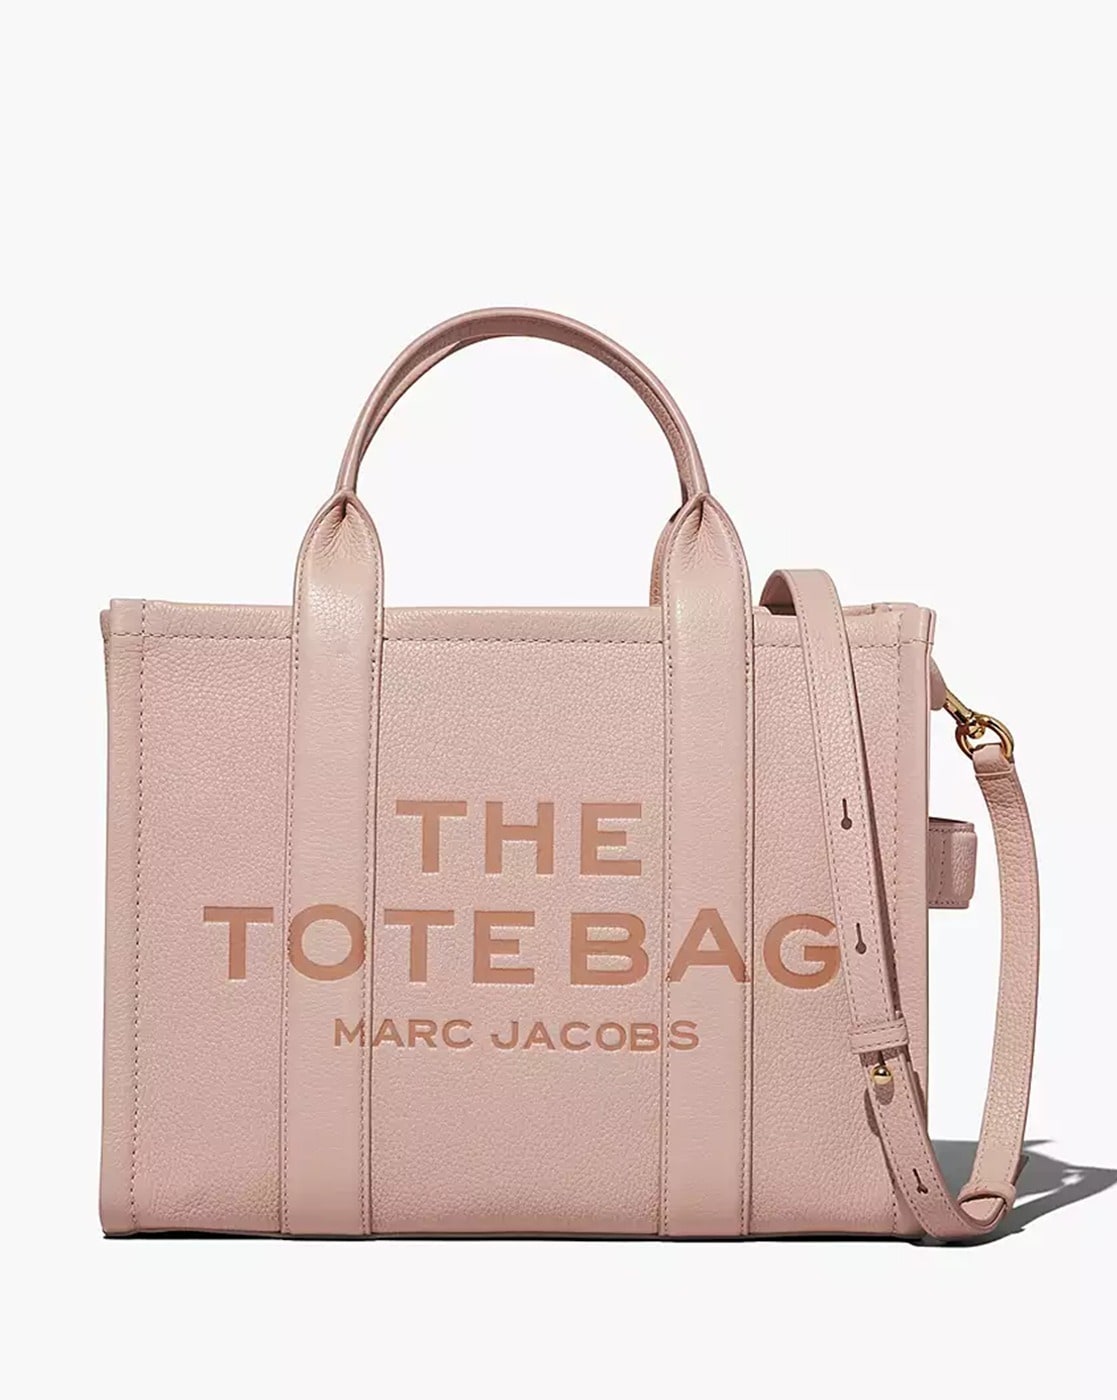 MARC JACOBS TOTE BAG SIZE COMPARISON 🔥 Mini, Small & Large Travel Tote -  YouTube